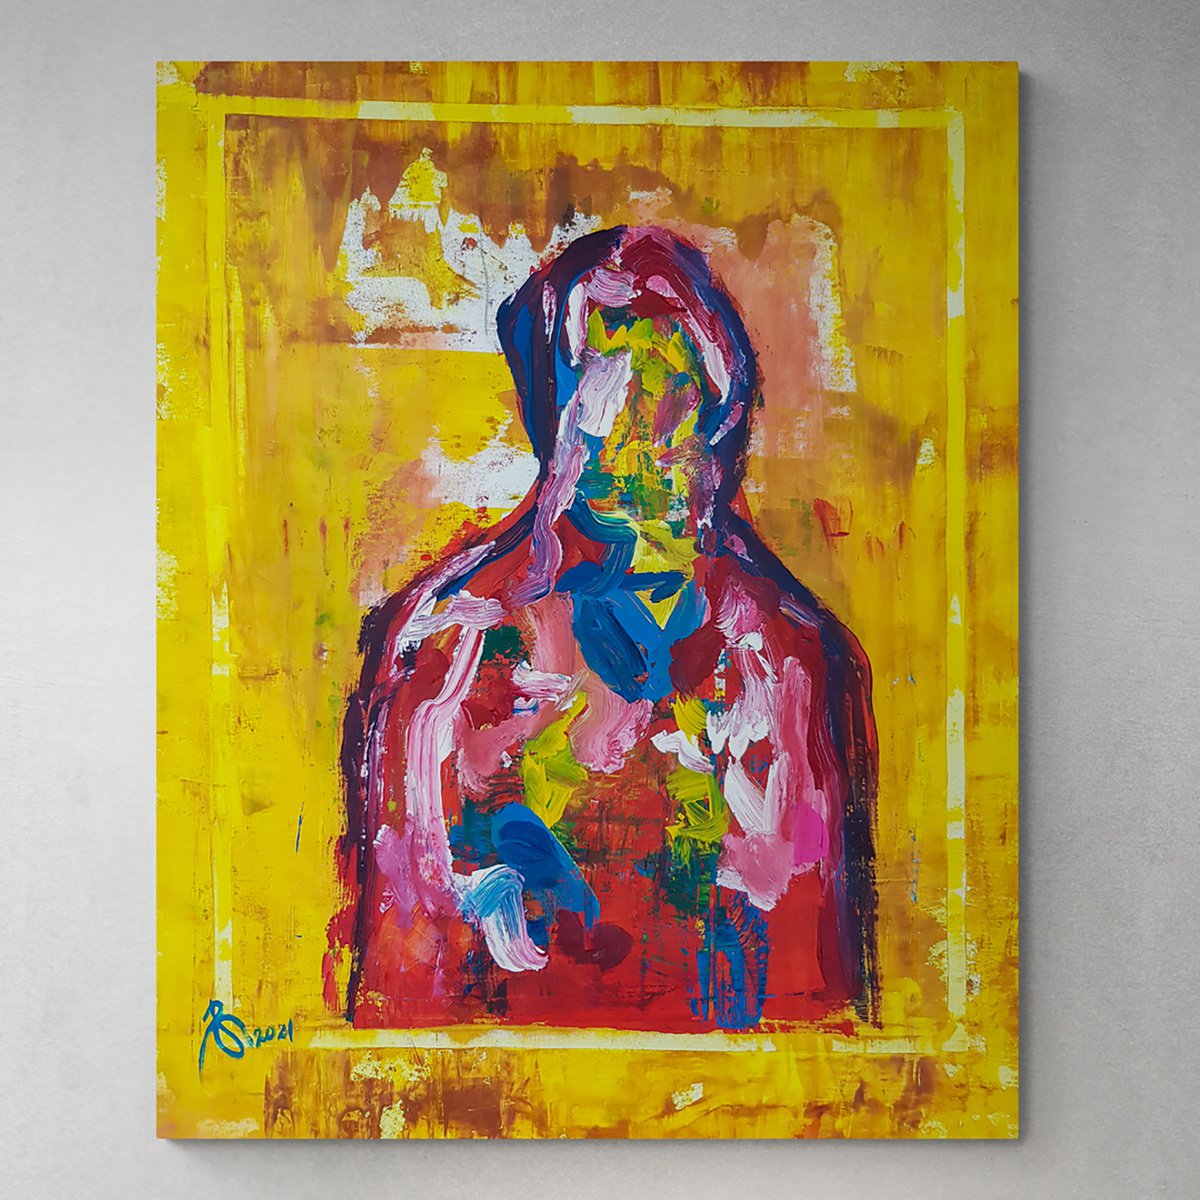 S. N-3 (XXL) - (H)130x(W)106 cm. Contemporary Abstract Expressionist Religious Icon by Retne